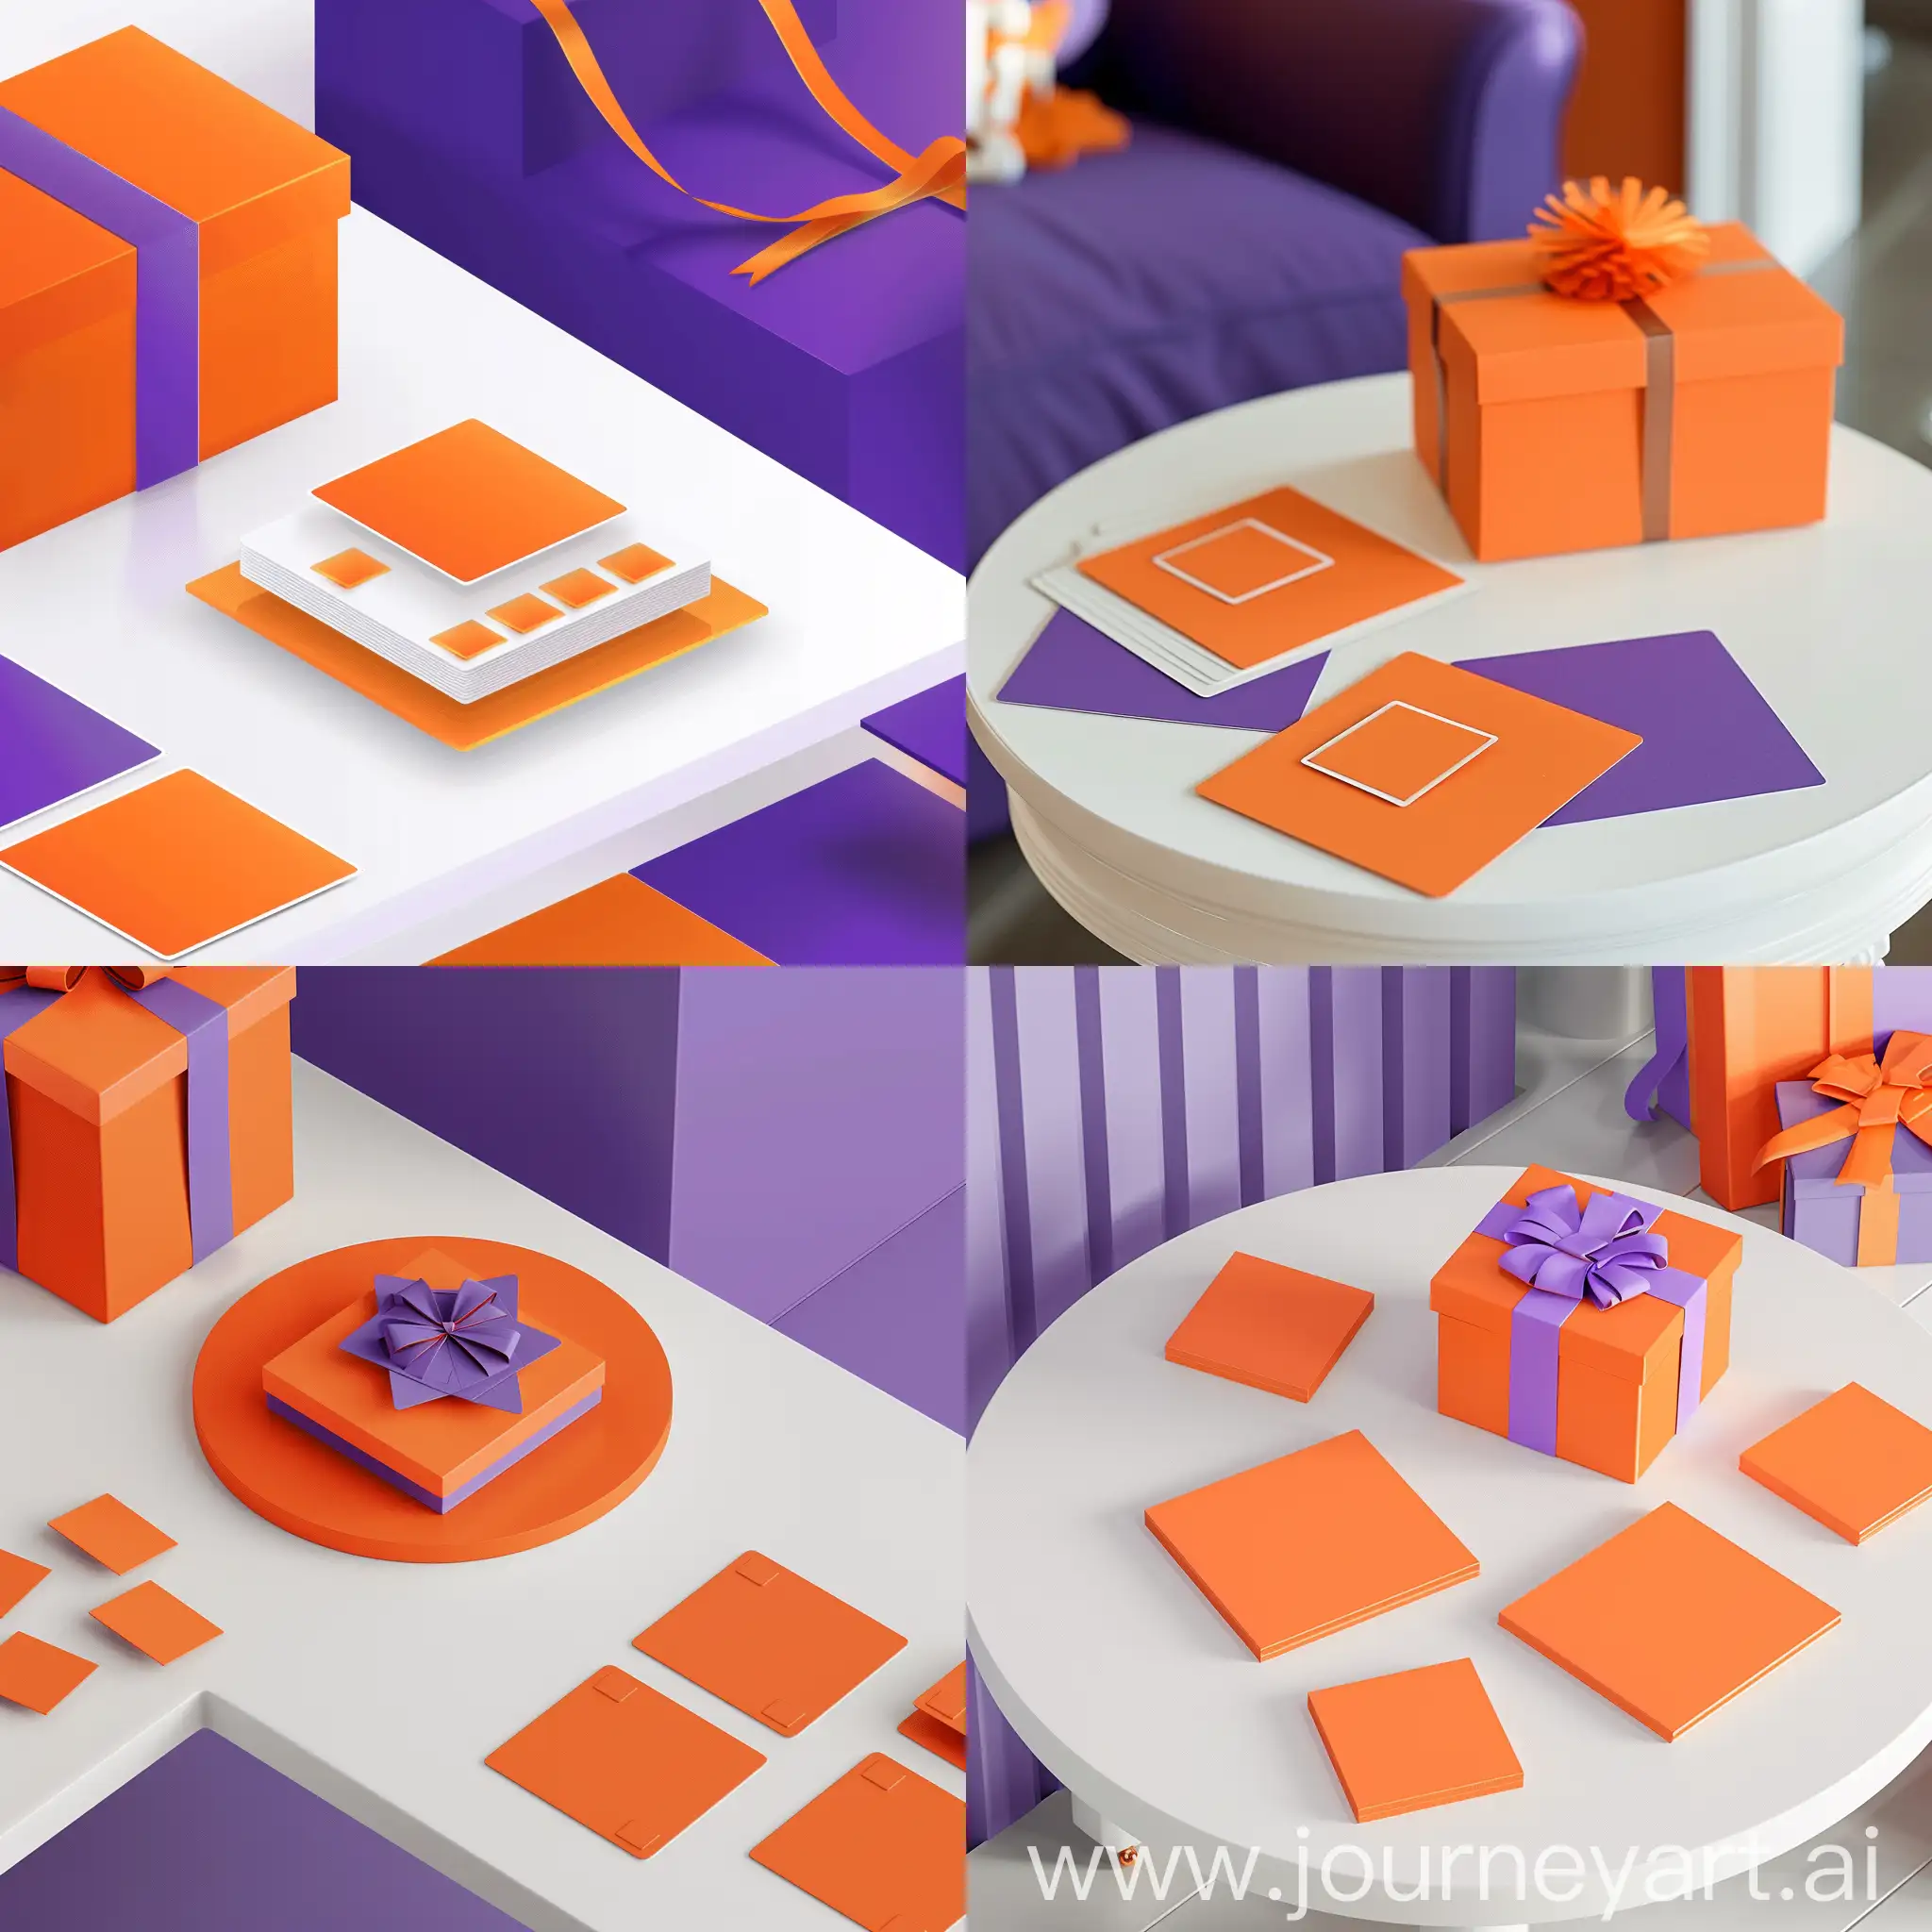 Orange-and-Purple-Themed-Vector-Design-with-Gift-Box-and-Cards